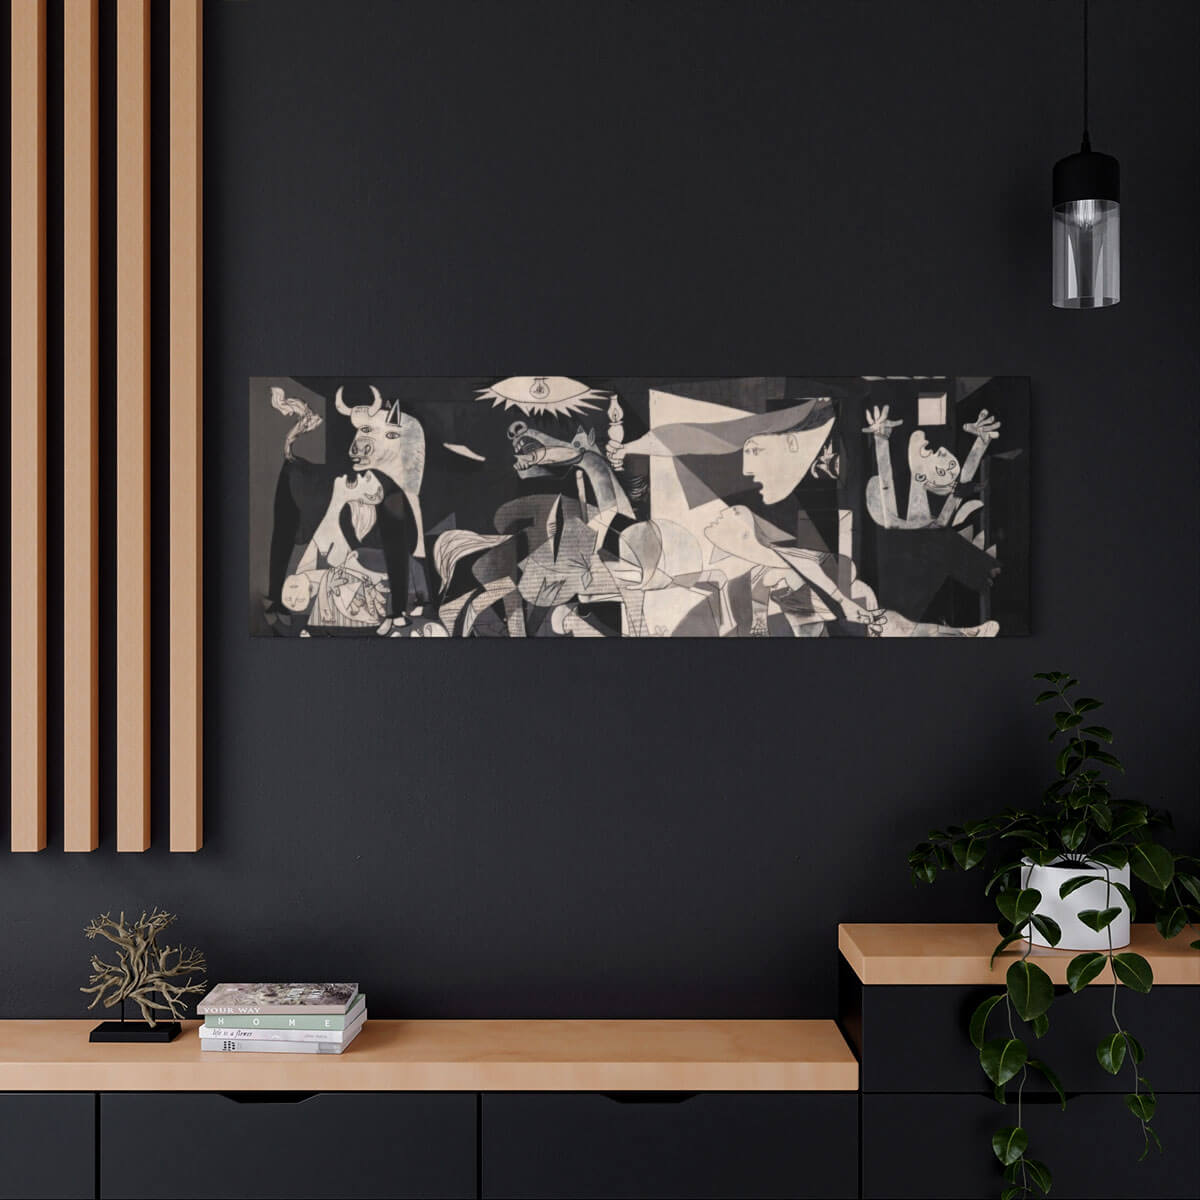 Modern wall decor inspired by Picasso's iconic painting